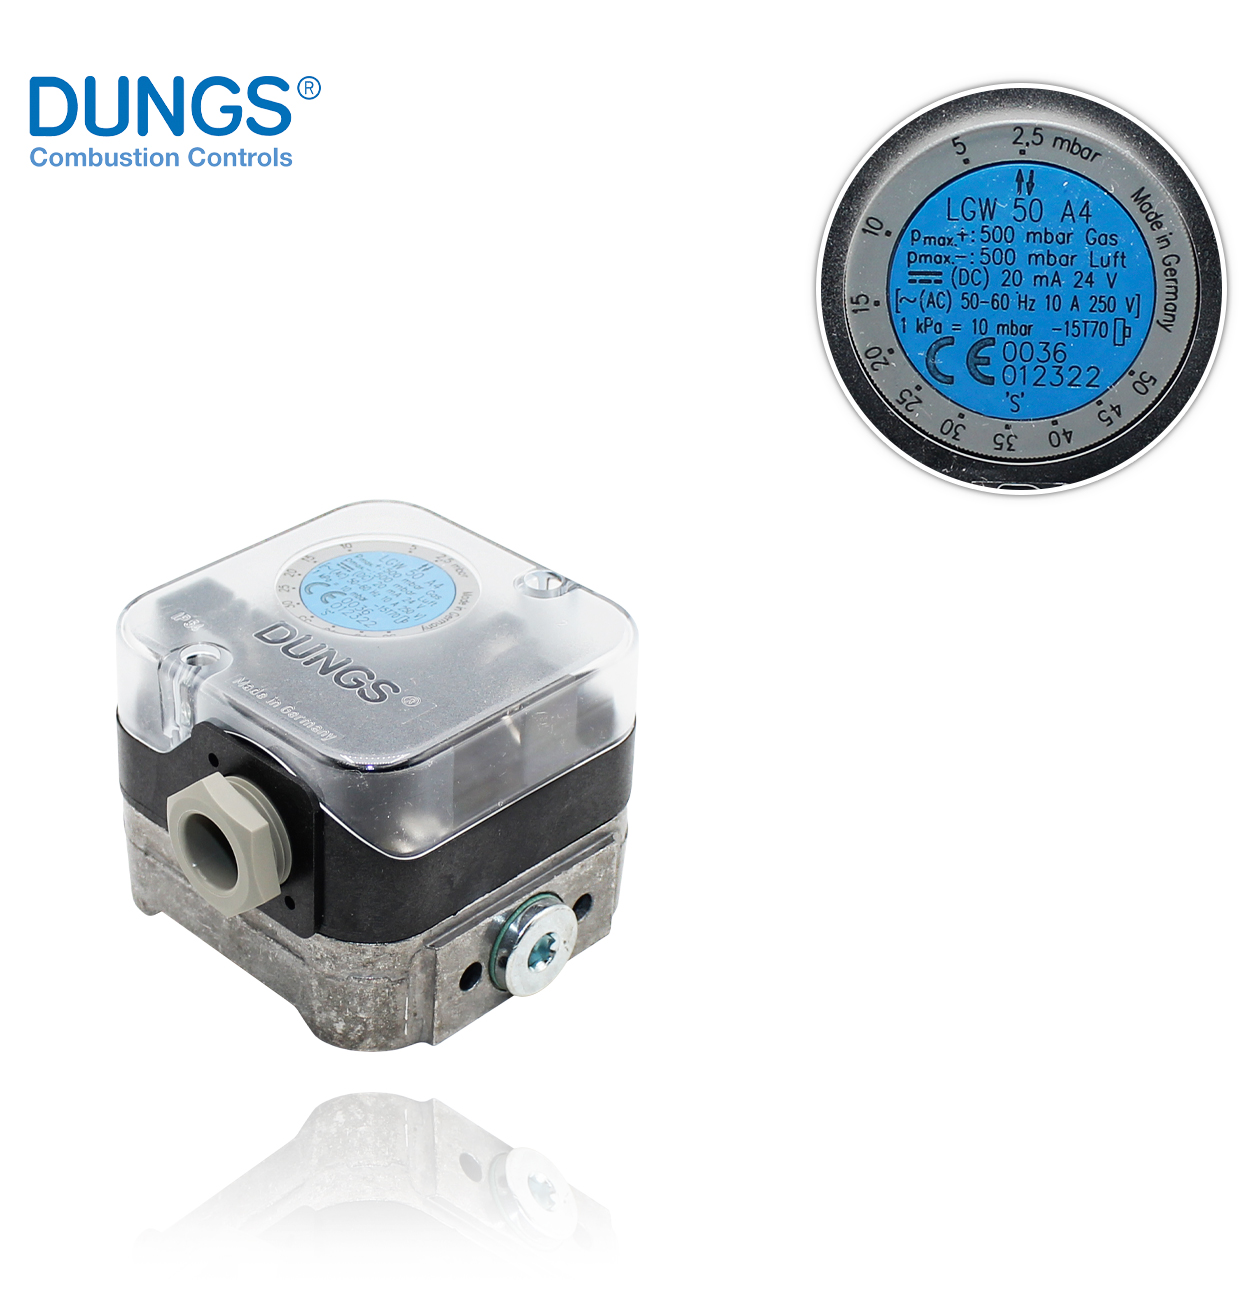 LGW 50 A4 Au 2.5-50mbar. FOR GAS AND AIR, GOLDCONTACT PRESSURE SWITCH DUNGS 229385